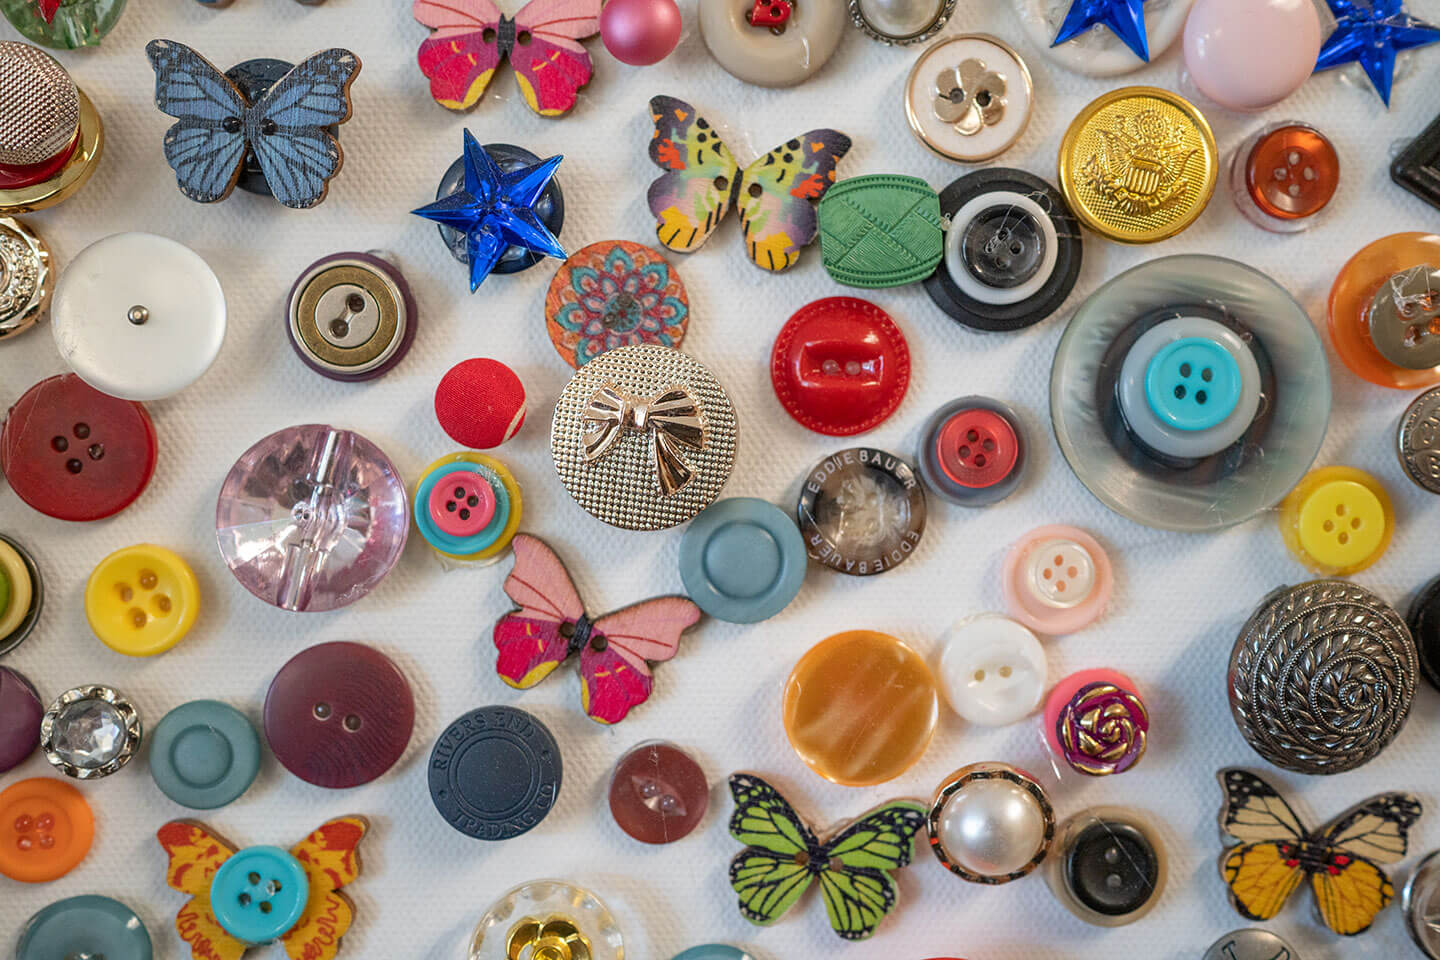 Colorful buttons of different shapes laid out on a white surface.